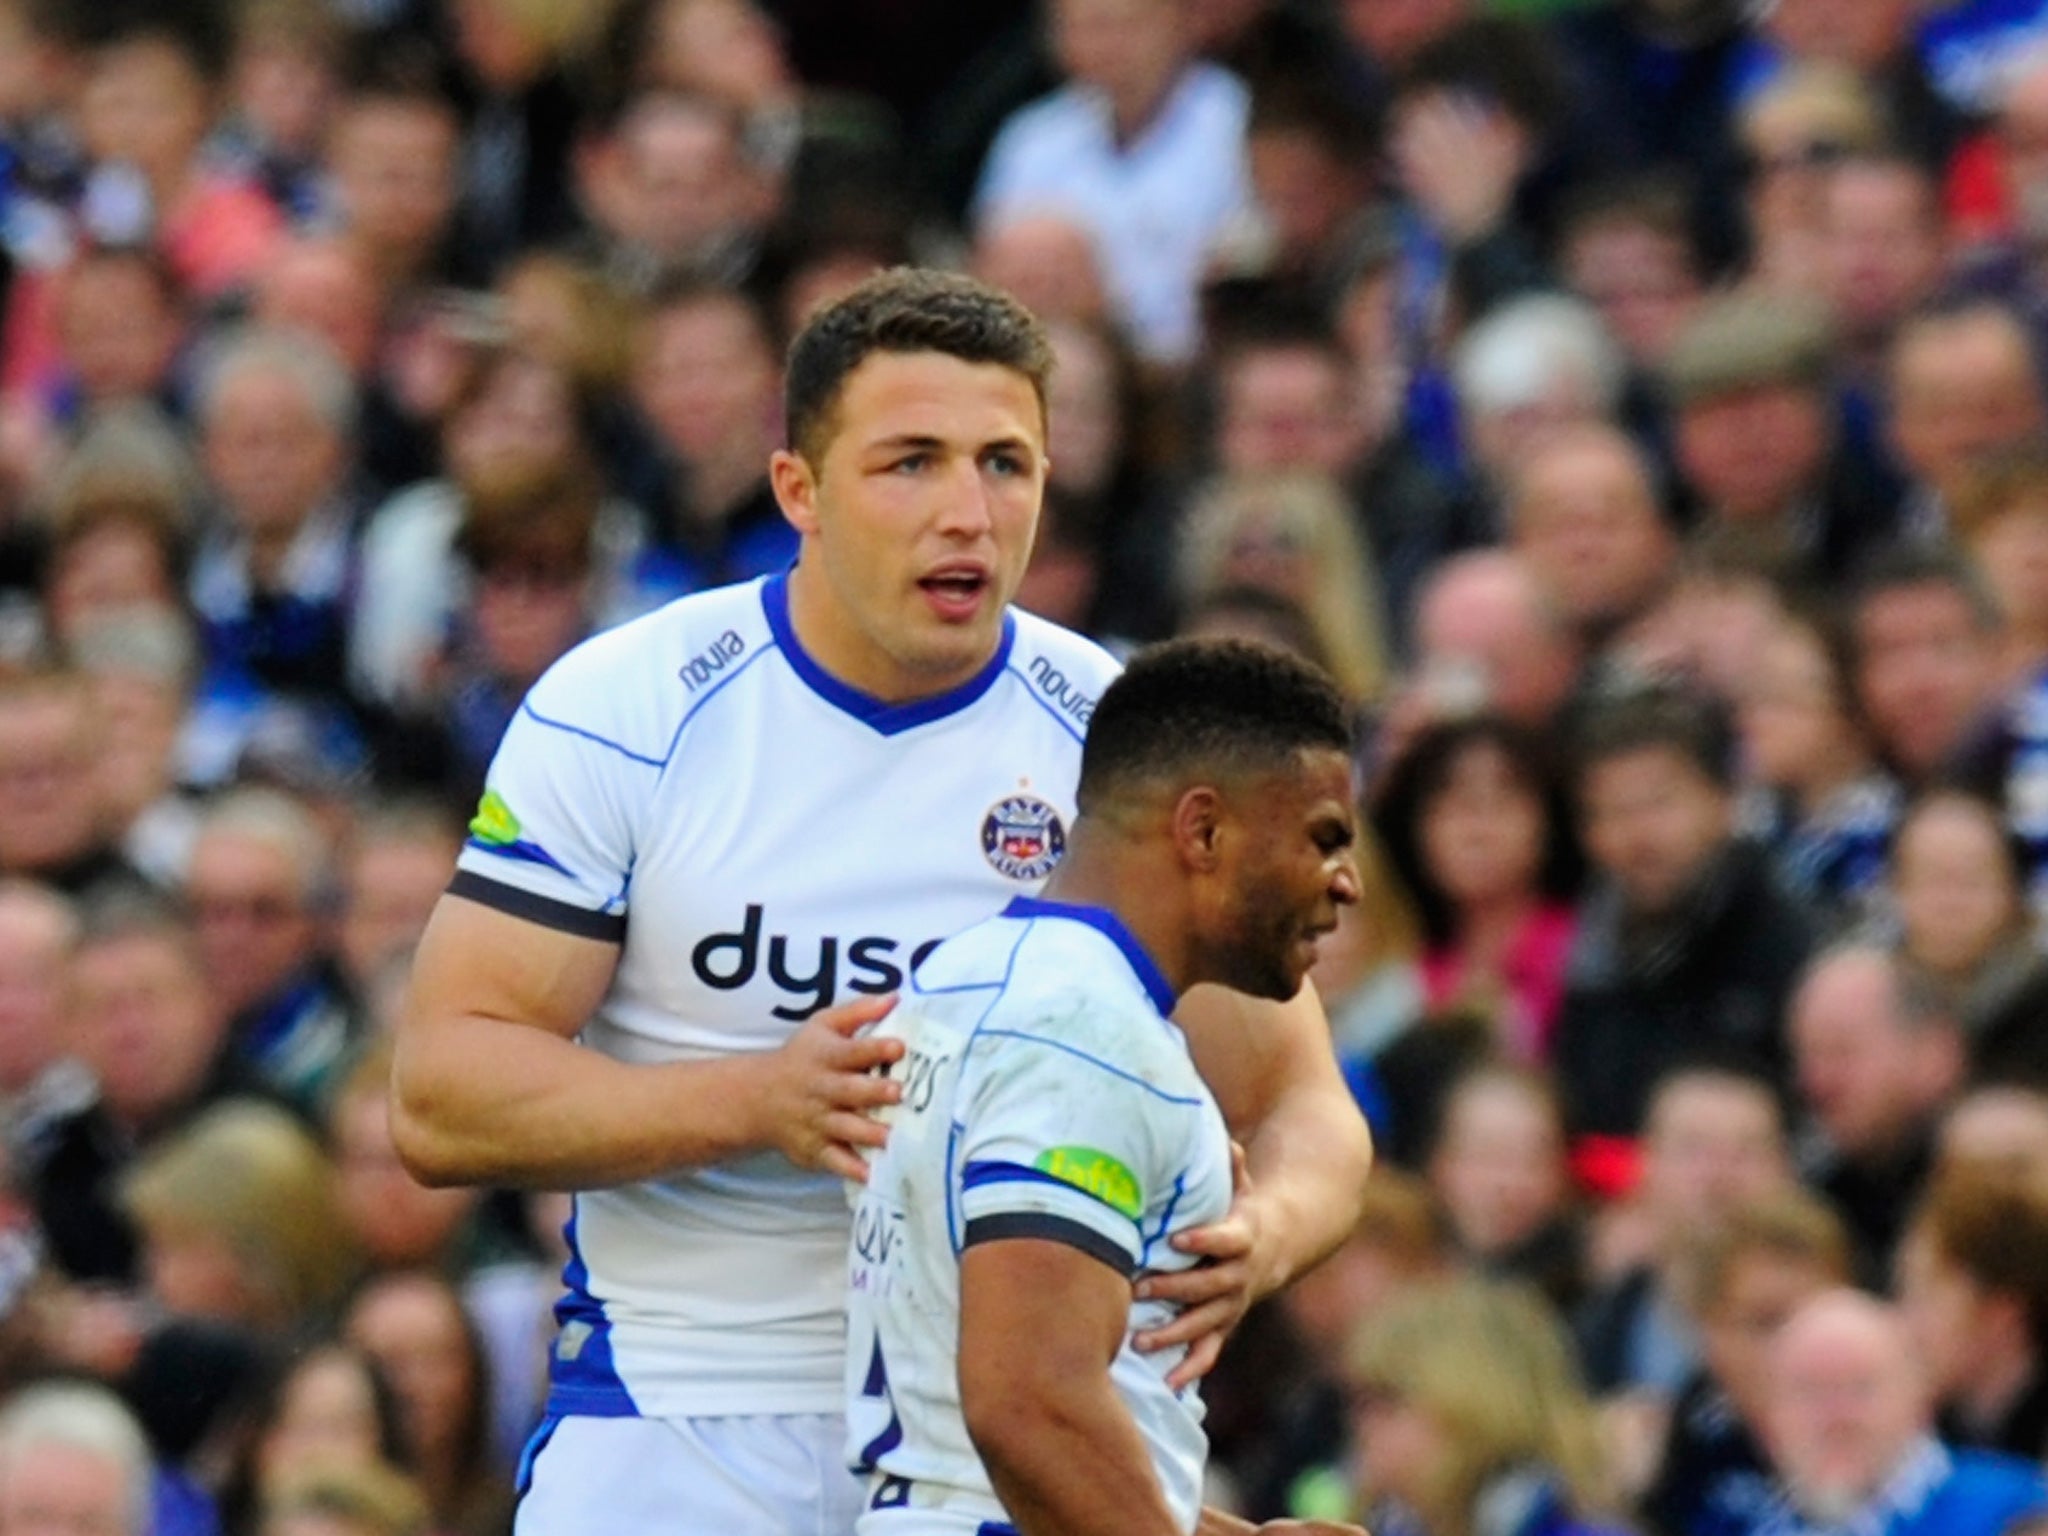 England still see Sam Burgess as an inside centre but he plays for Bath tonight on the blind-side flank